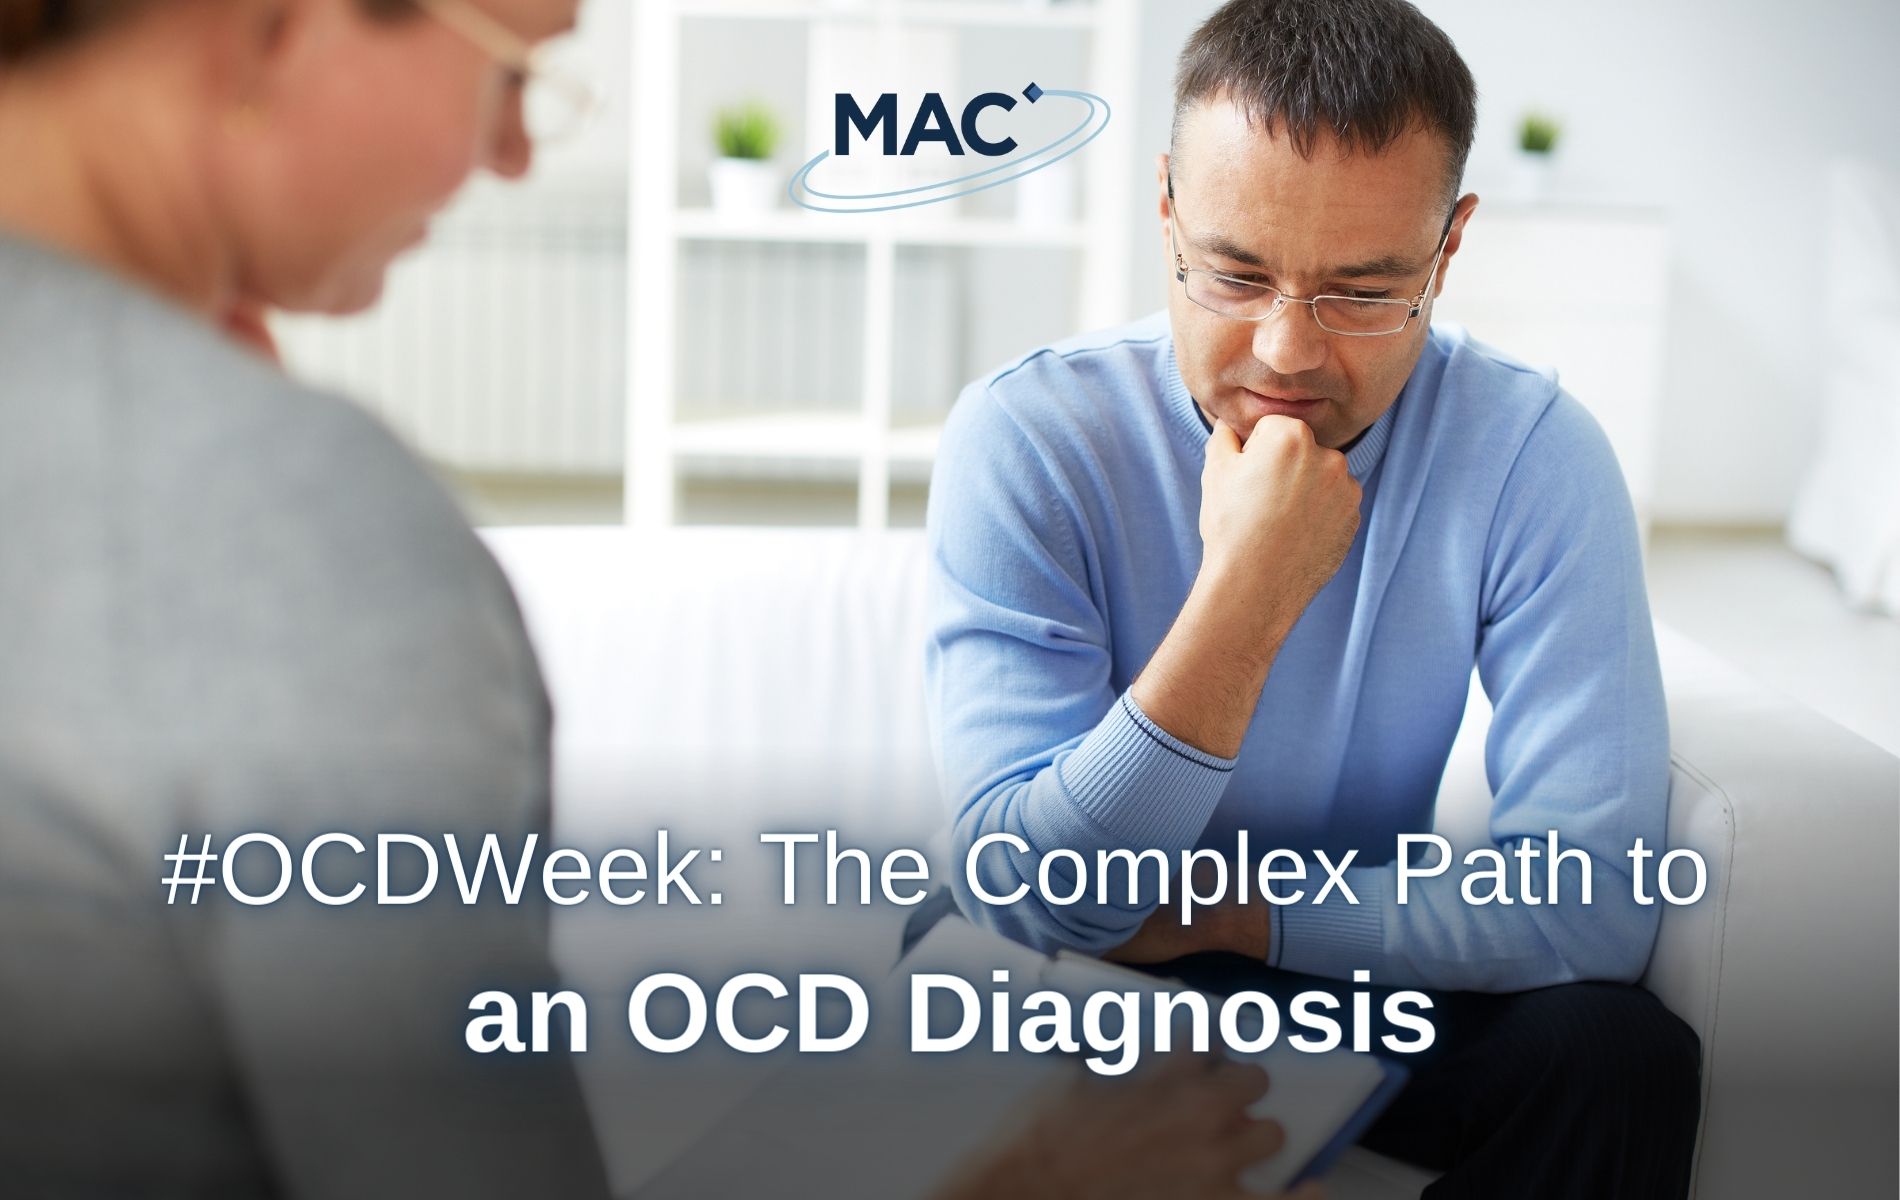 The Complex Path to an OCD Diagnosis